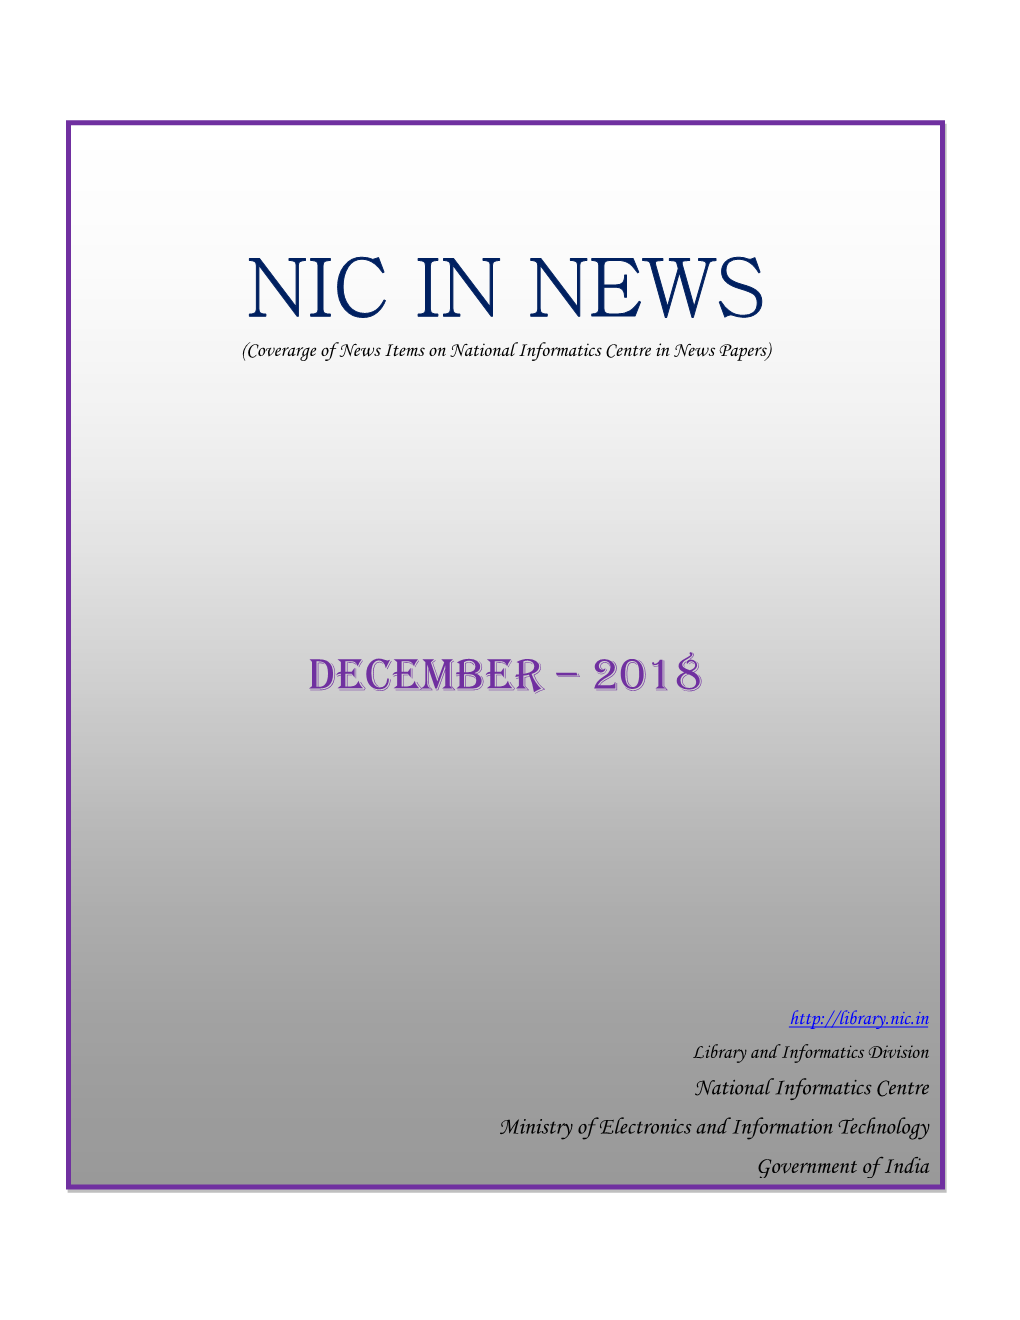 NIC in NEWS (Coverarge of News Items on National Informatics Centre in News Papers)